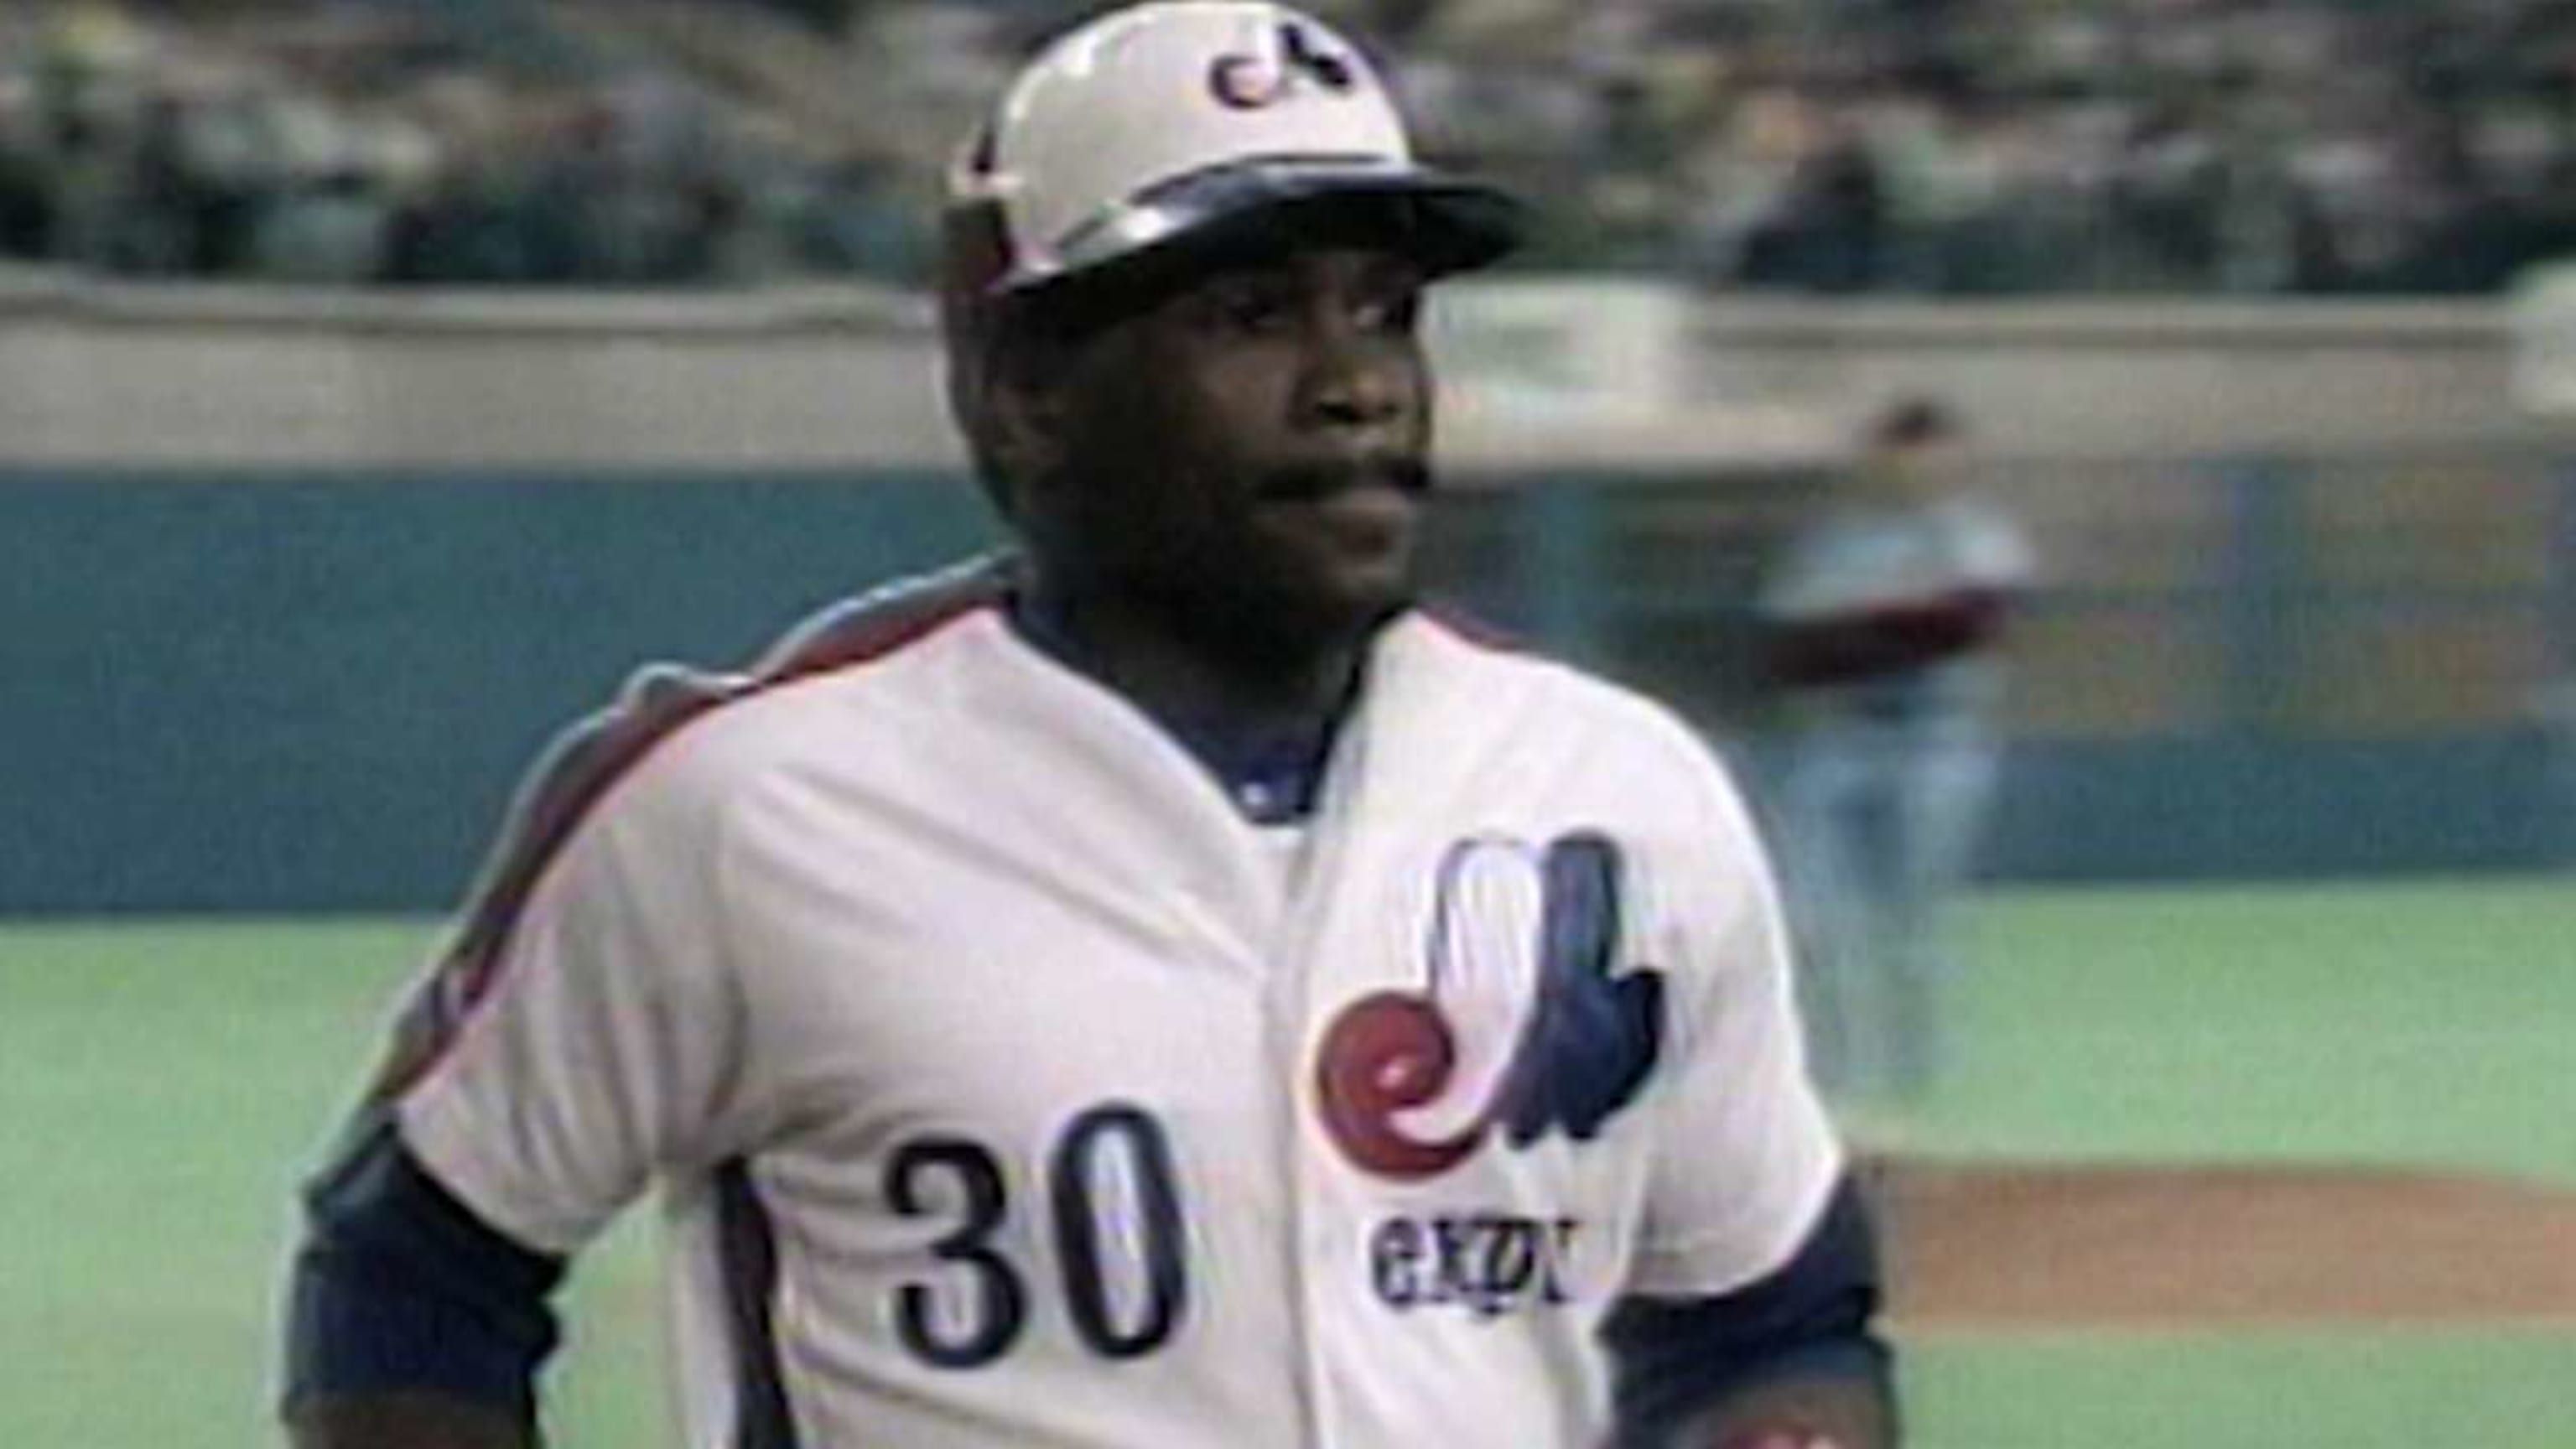 Hall of Fame 2017 results: Tim Raines completes Cooperstown climb